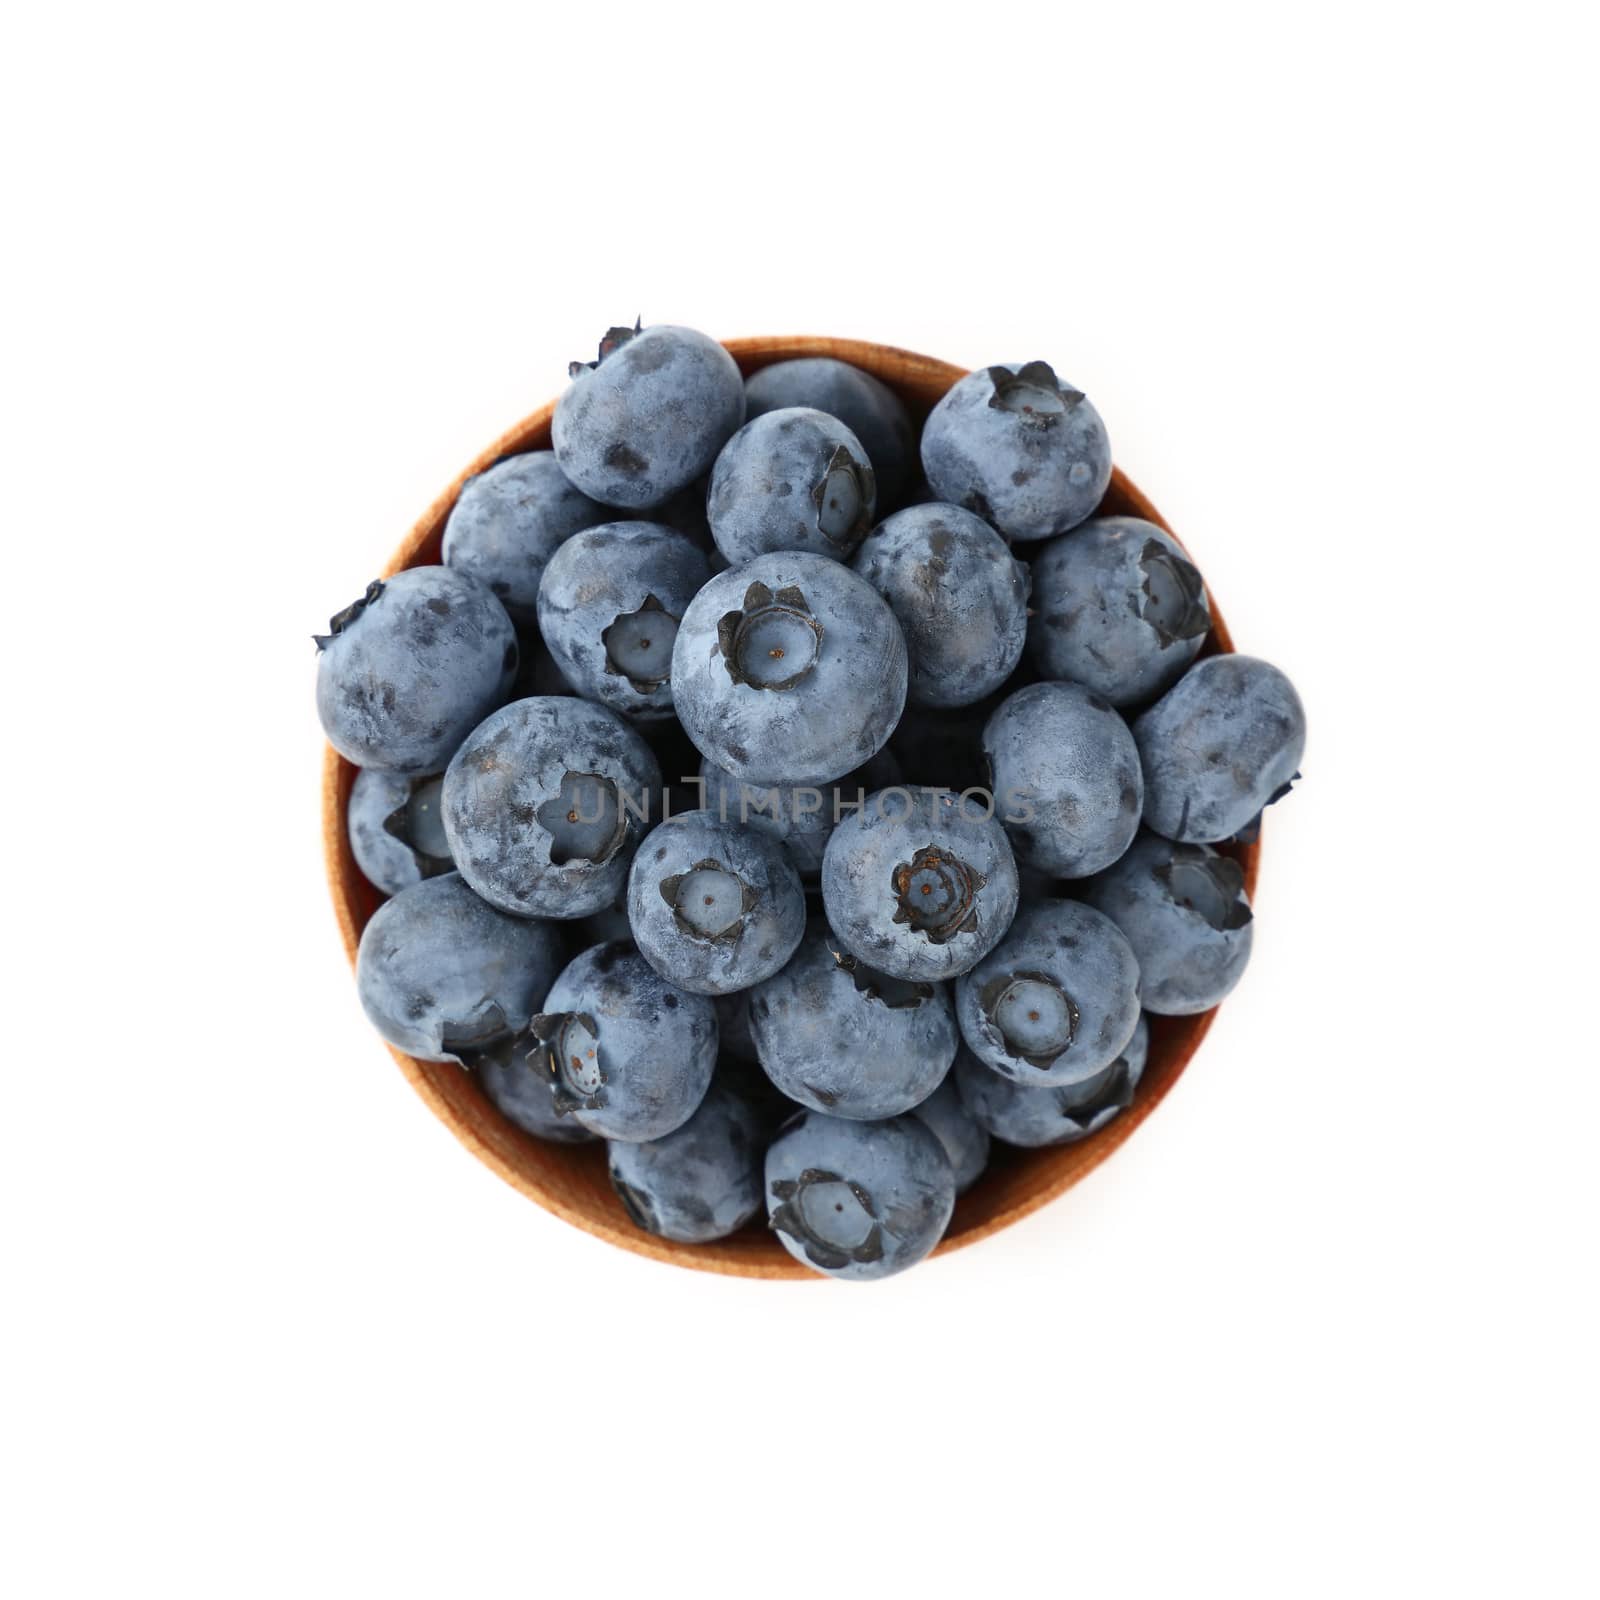 Portion of fresh blueberry berries in rustic wooden bowl isolated on white background, close up, elevated top view, directly above